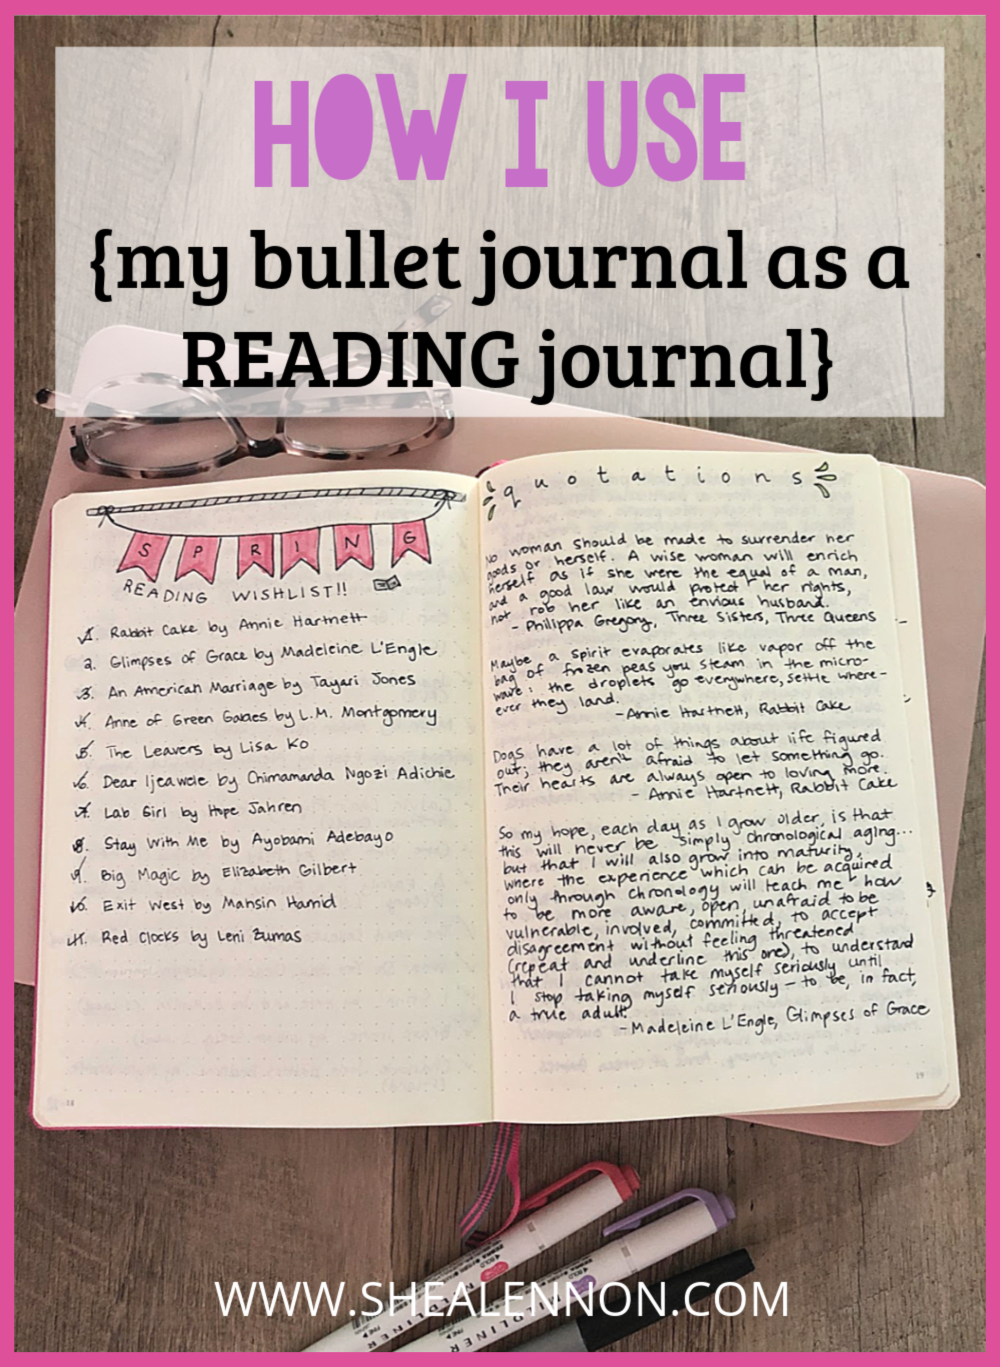 How I Use a Bullet Journal to Track My Reading - Shea Lennon